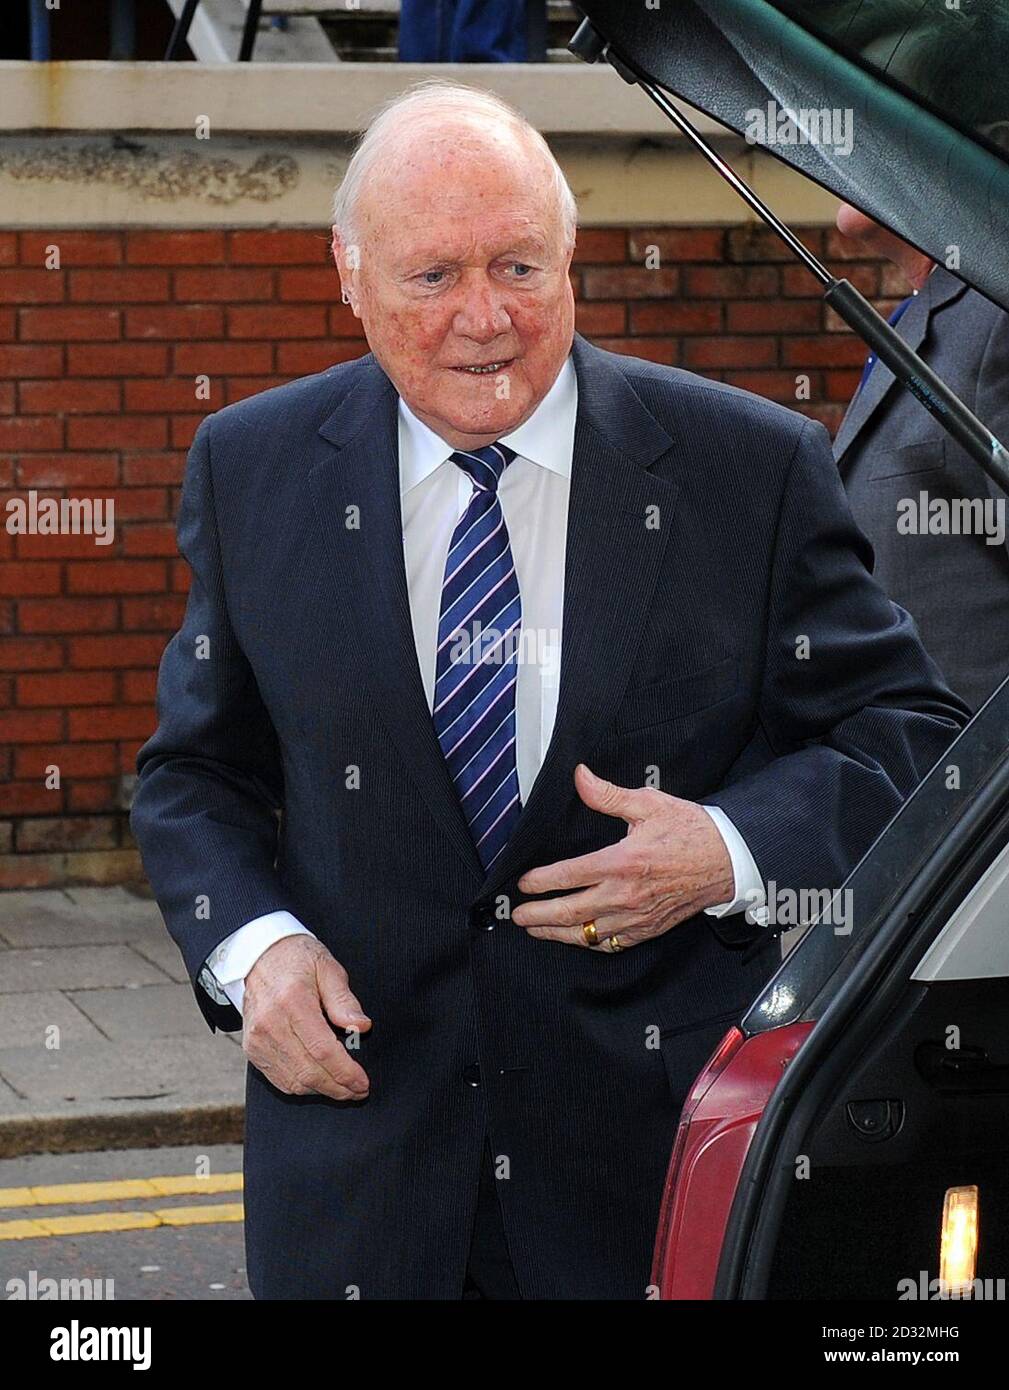 Former TV presenter Stuart Hall arrives at The Sessions House Crown Court, Preston. Stock Photo